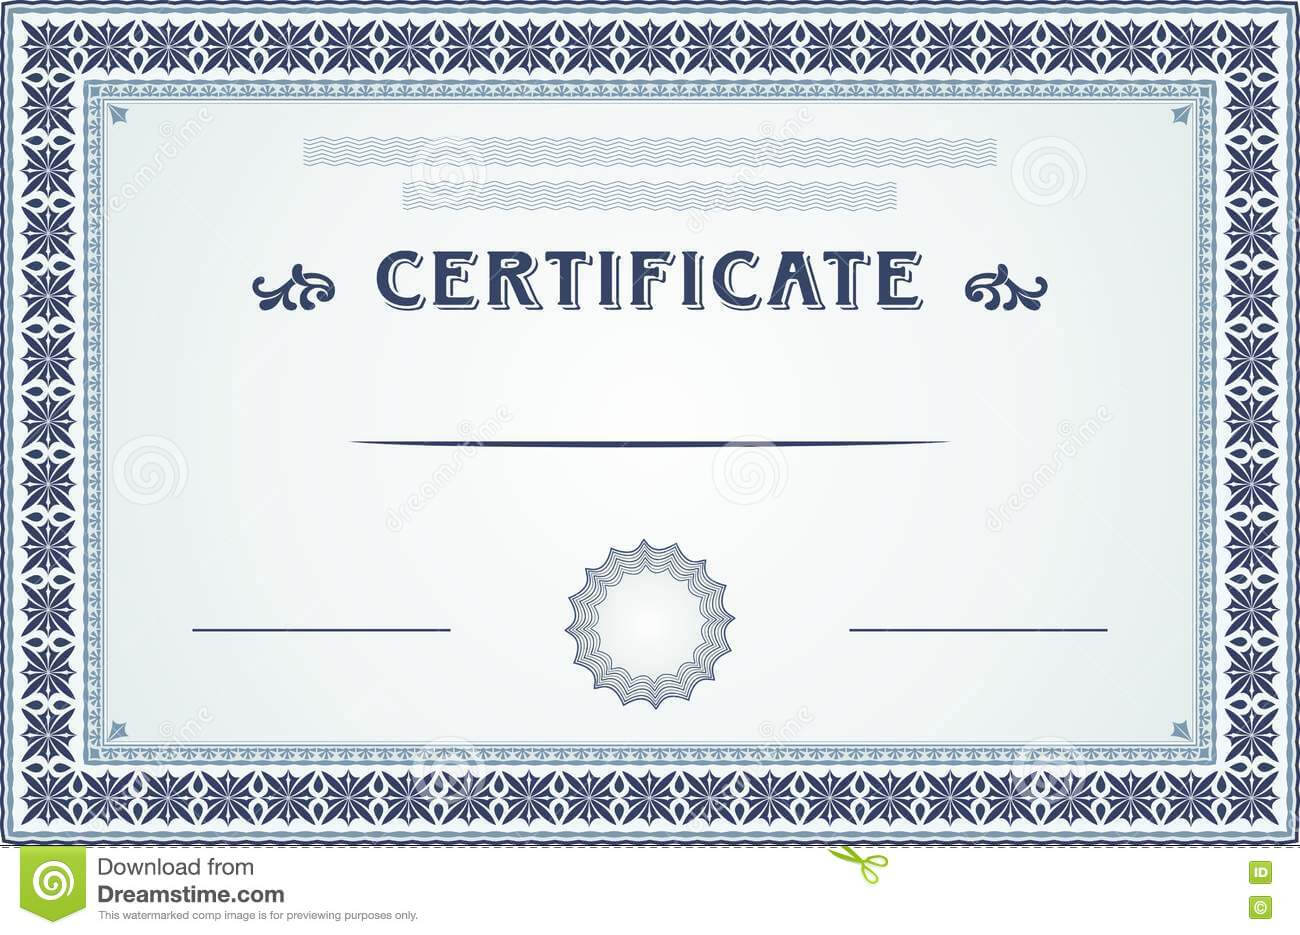 Certificate Border And Template Design Stock Vector Throughout Certificate Border Design Templates